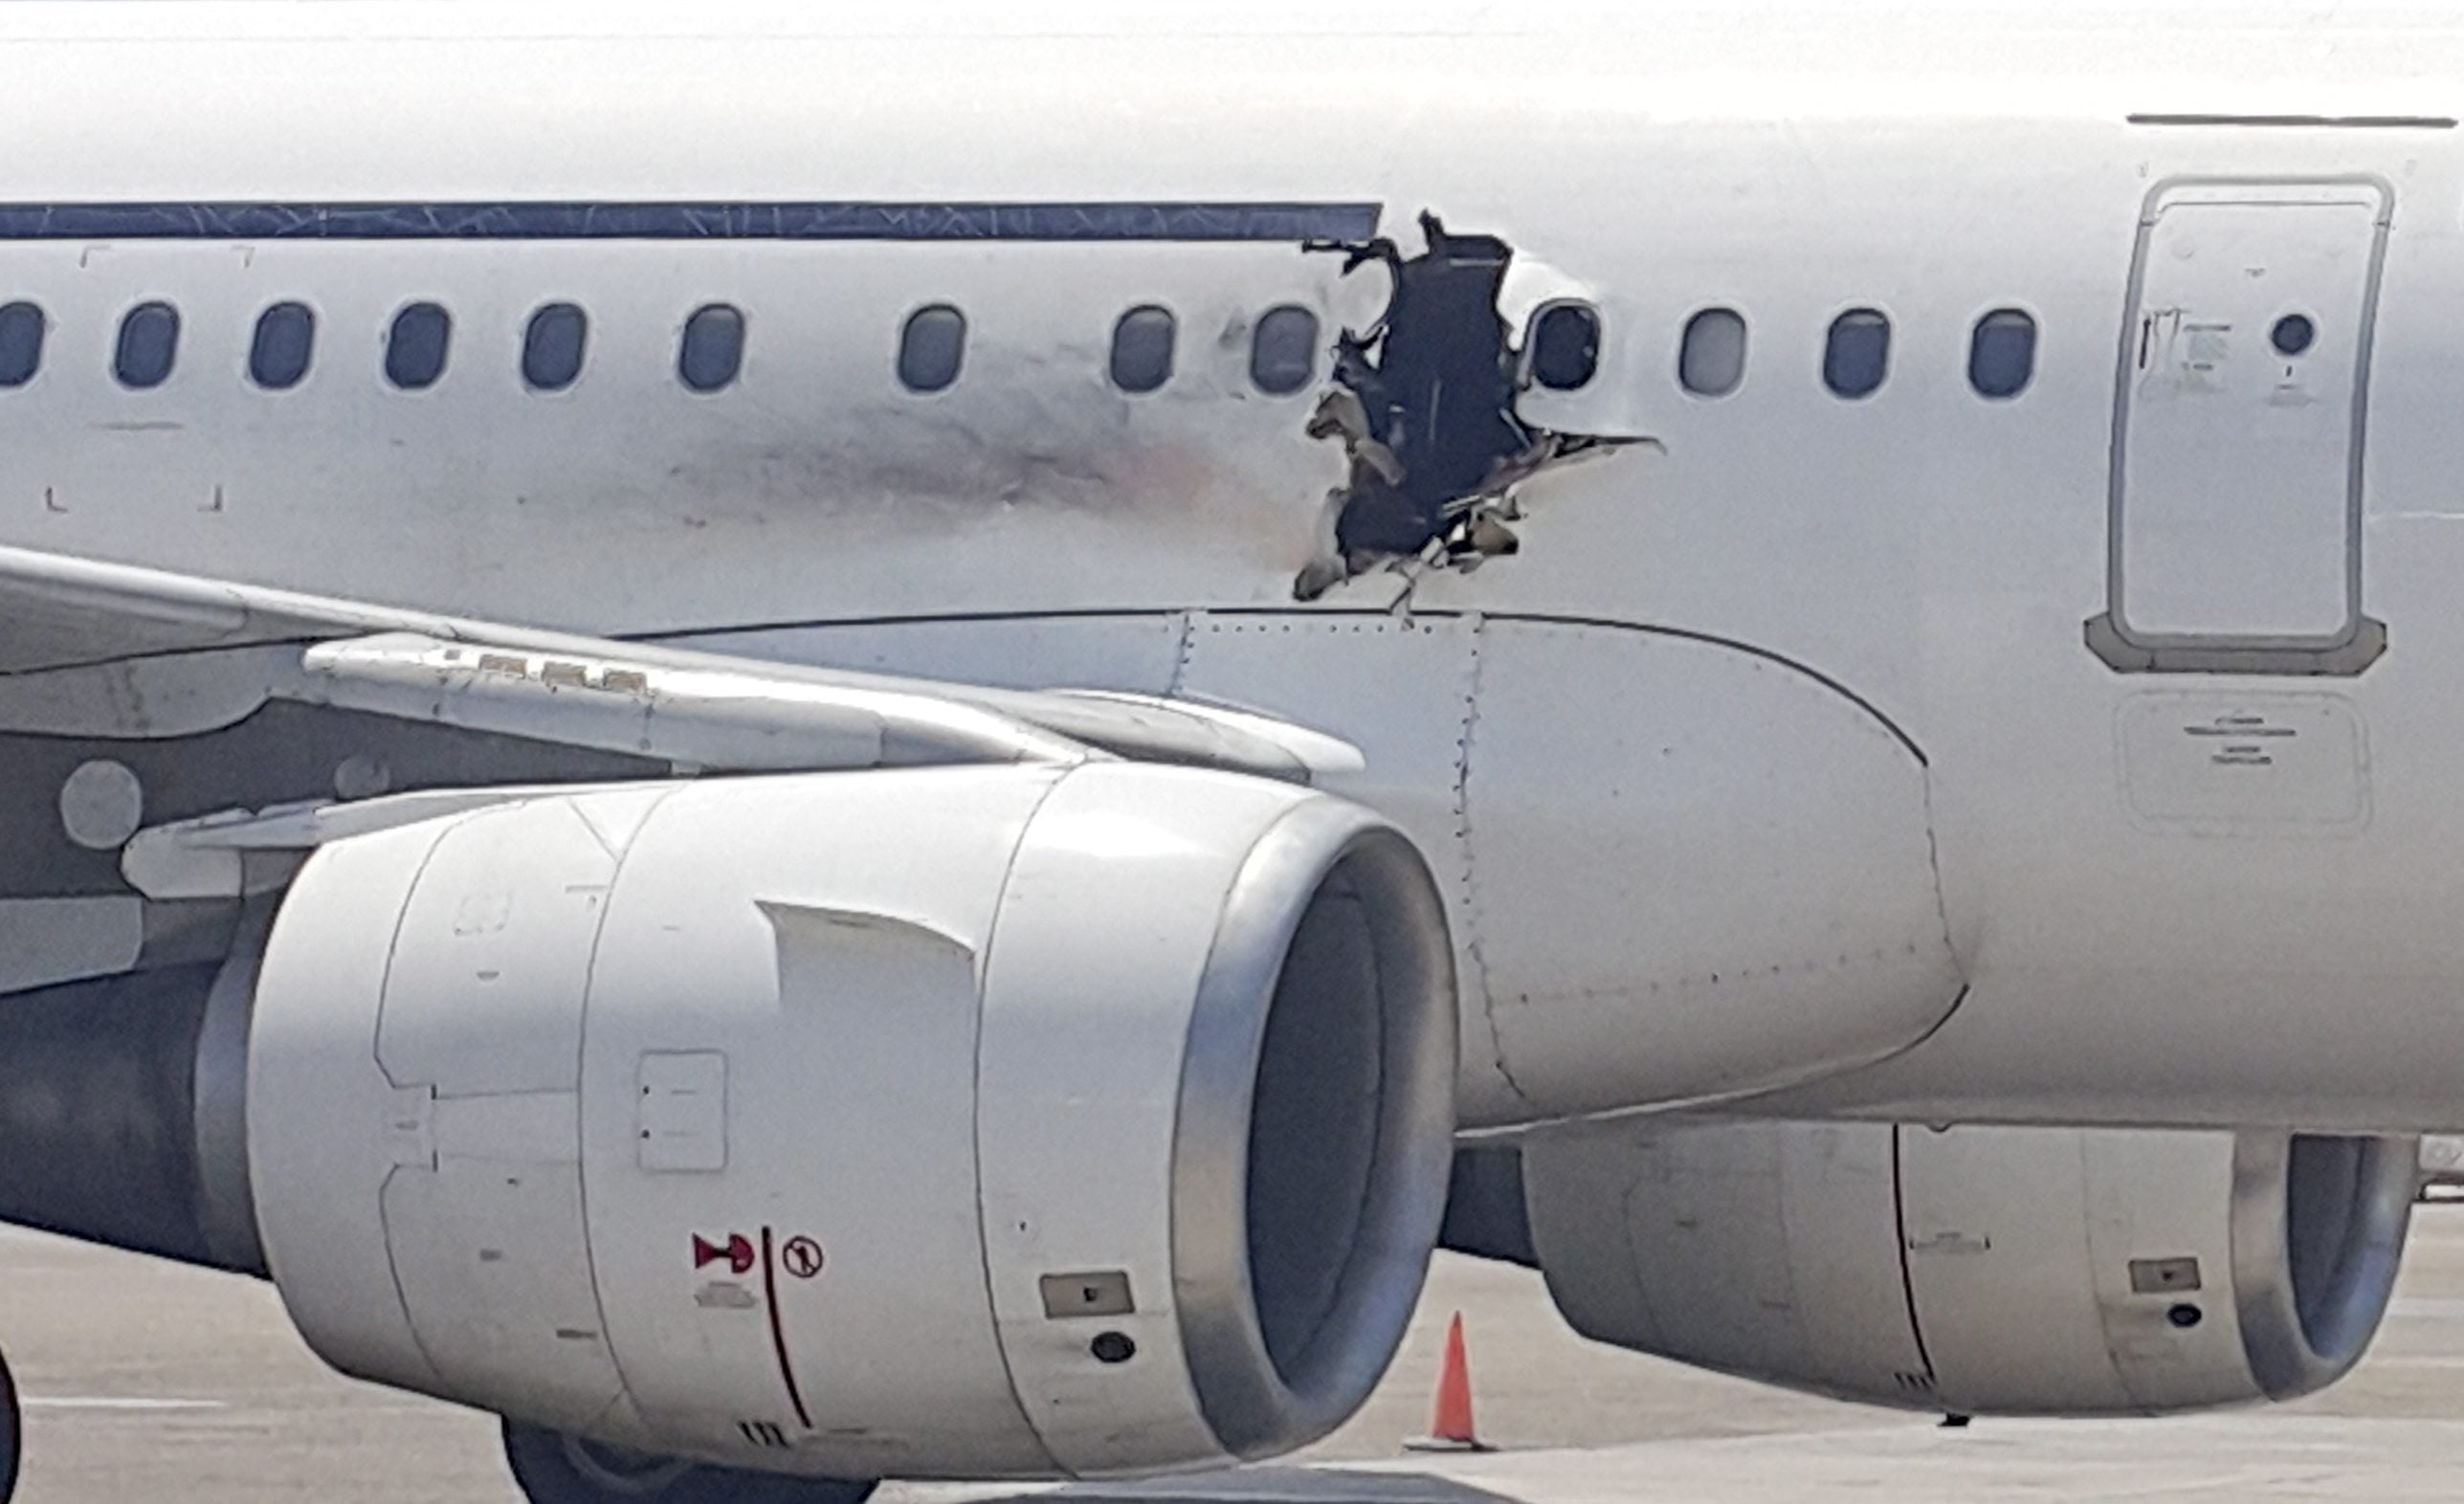 A hole is photographed in a plane operated by Daallo Airlines as it sits on the runway of the airport in Mogadishu, Somalia. A gaping hole in the commercial airliner forced it to make an emergency landing at Mogadishu's international airport late Tuesday, officials and witnesses said.